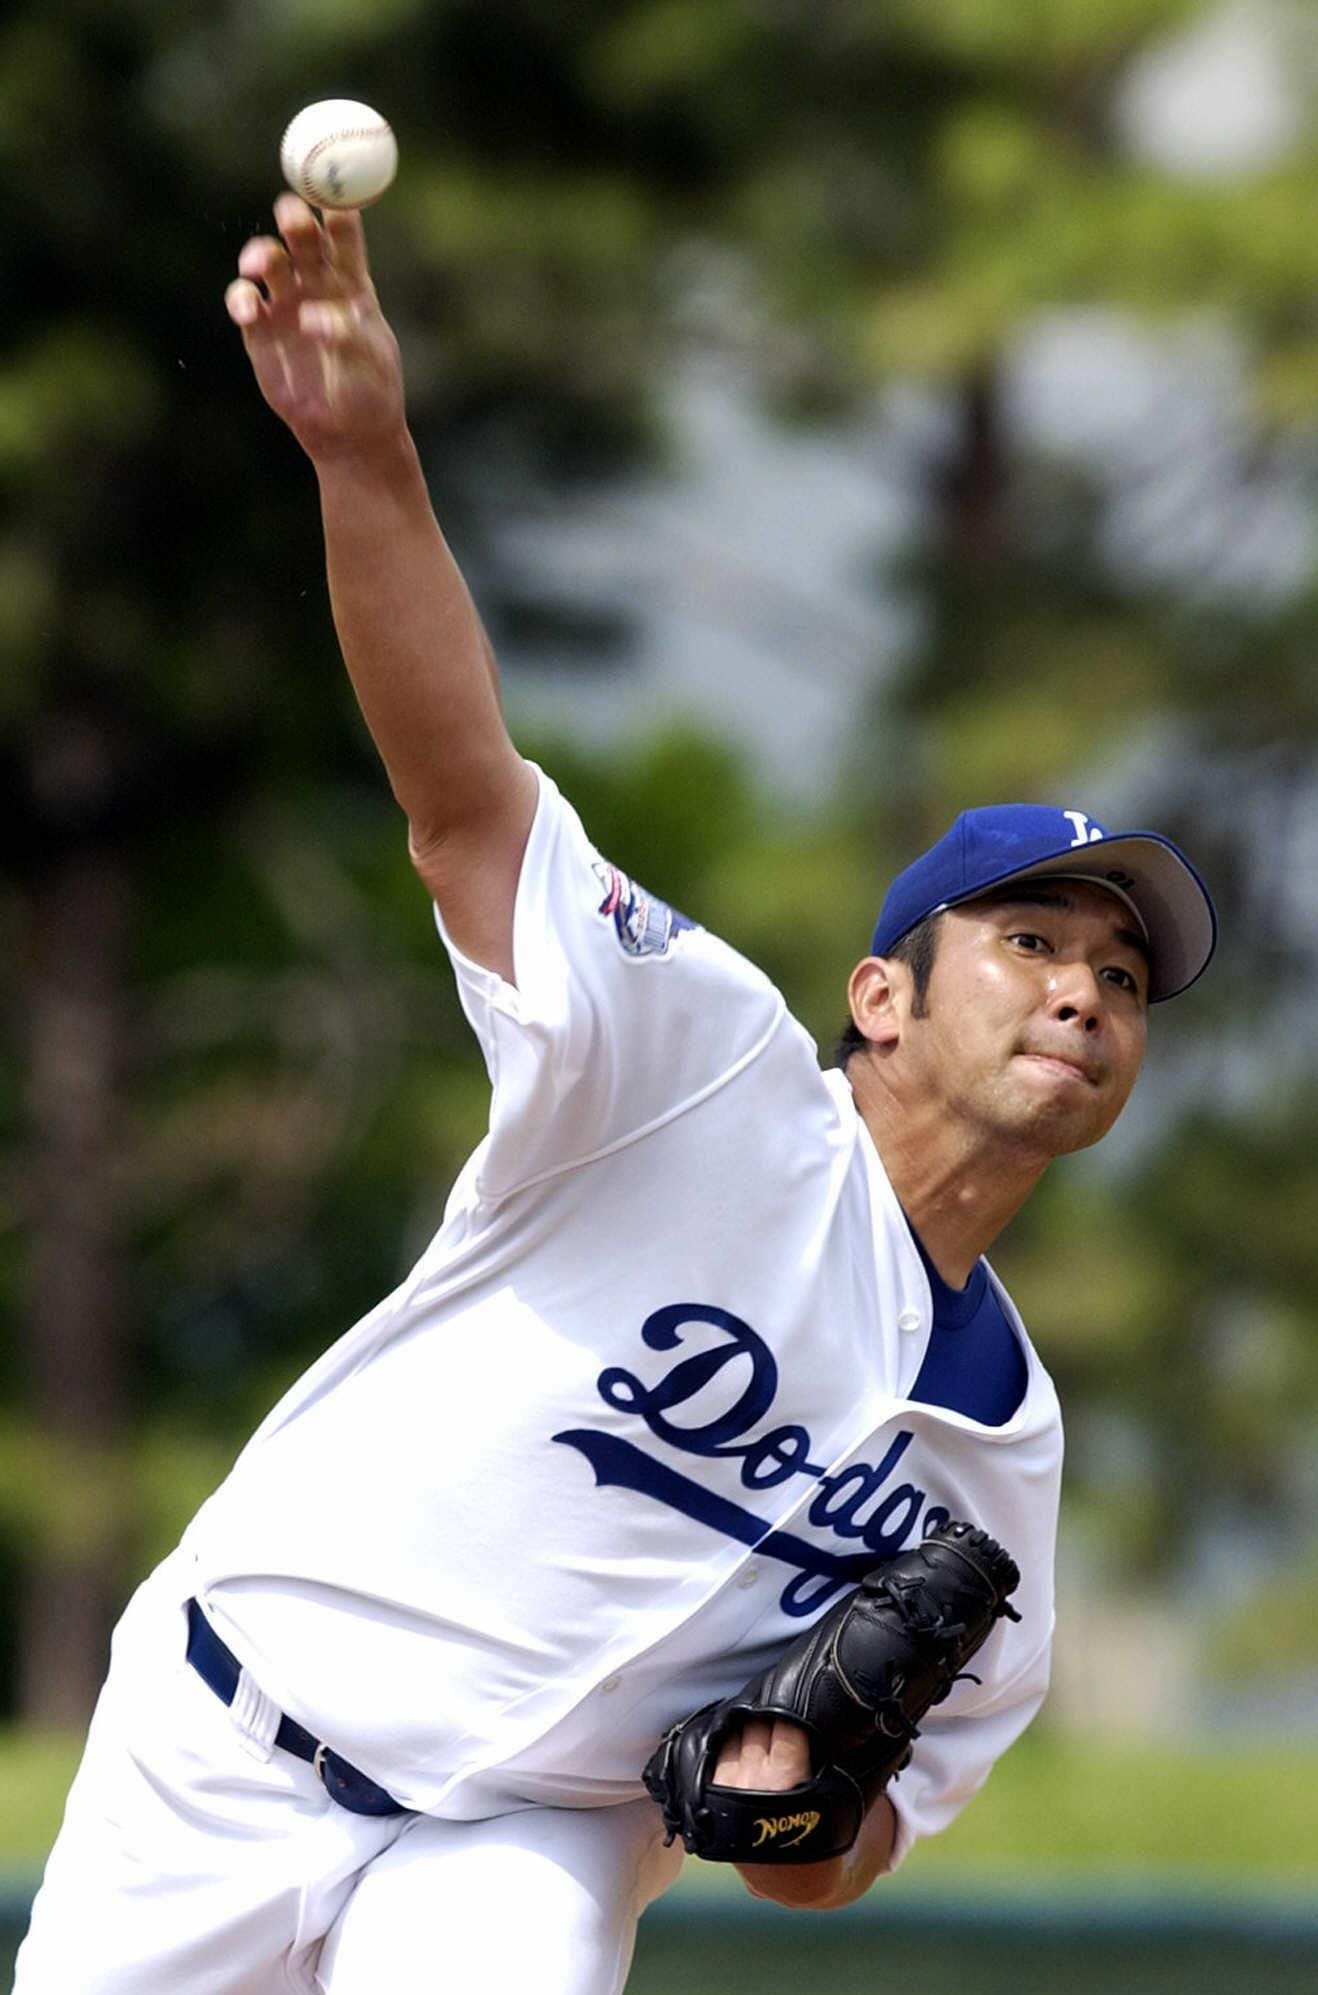 In case you missed it: Hideo Nomo is a Hall of Famer 